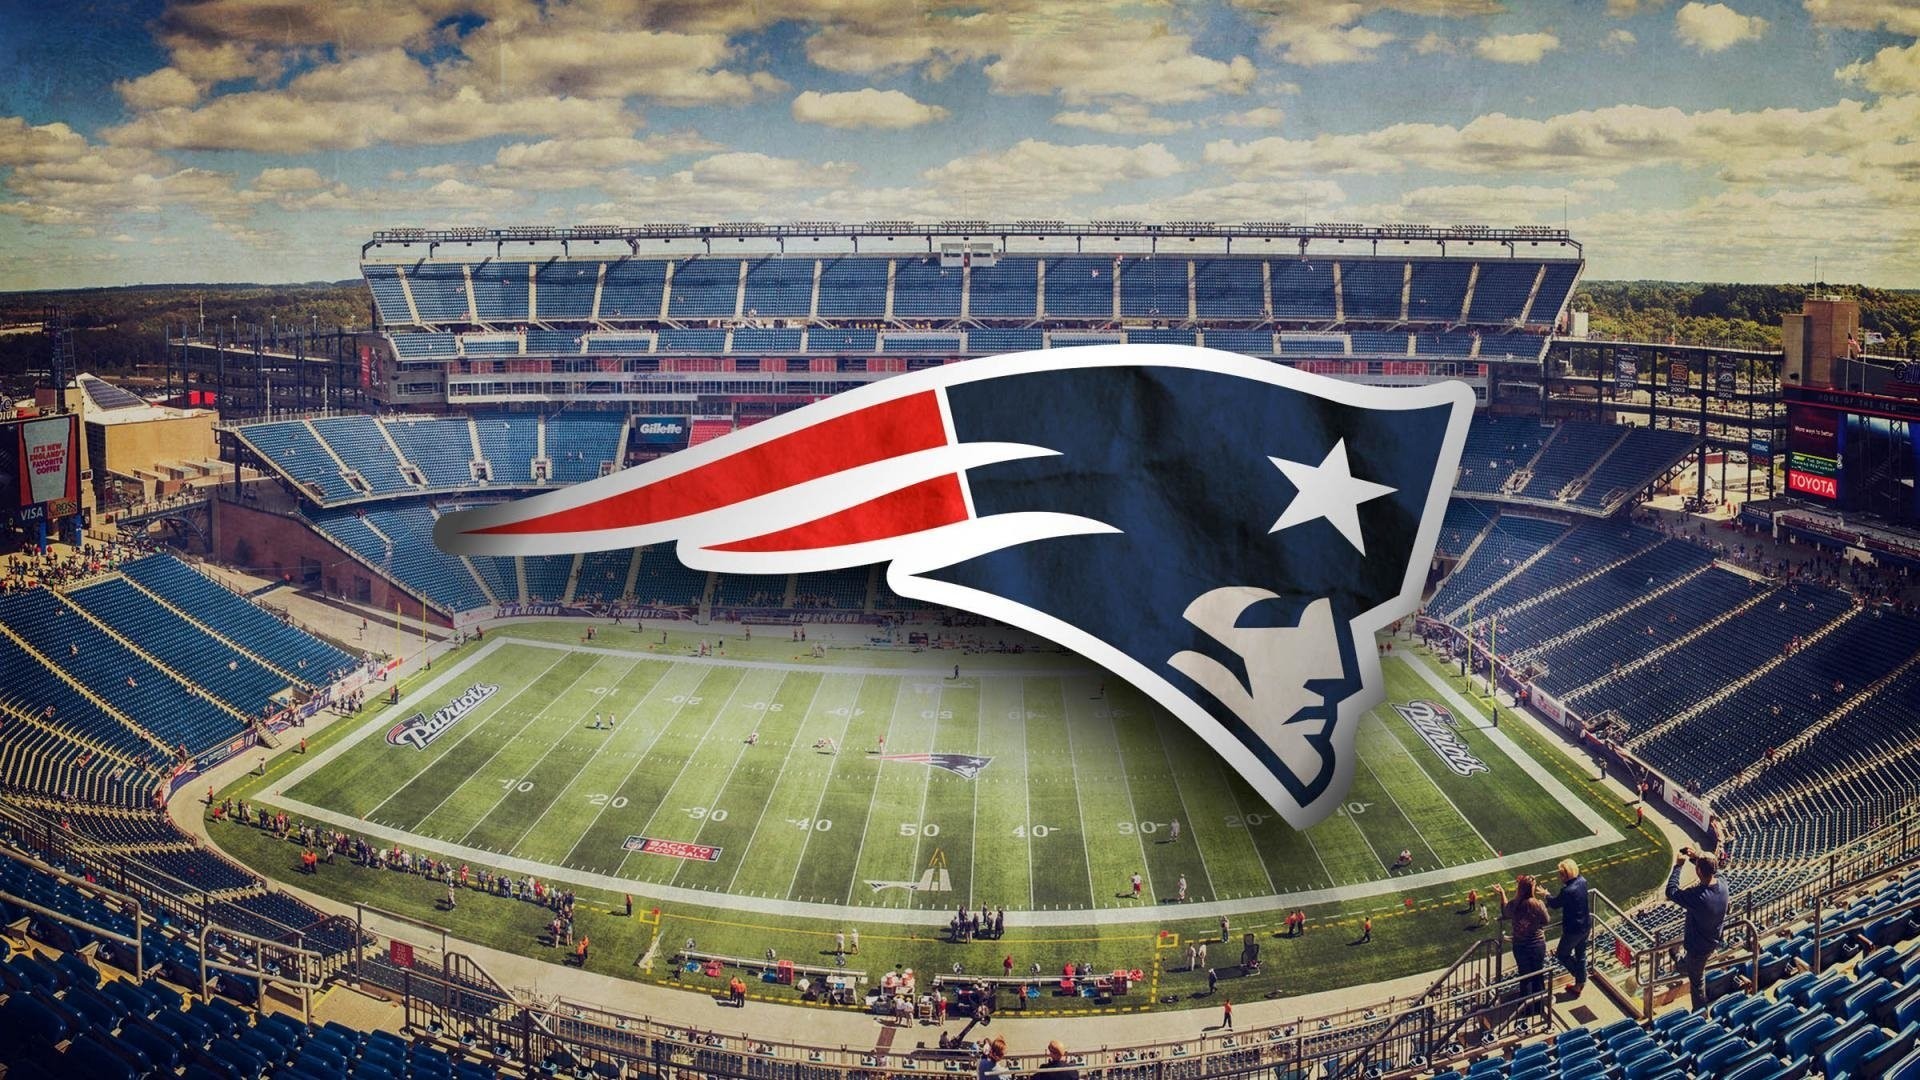 New England Patriots Wallpaper For Mac OS with high-resolution 1920x1080 pixel. Download and set as wallpaper for Desktop Computer, Apple iPhone X, XS Max, XR, 8, 7, 6, SE, iPad, Android